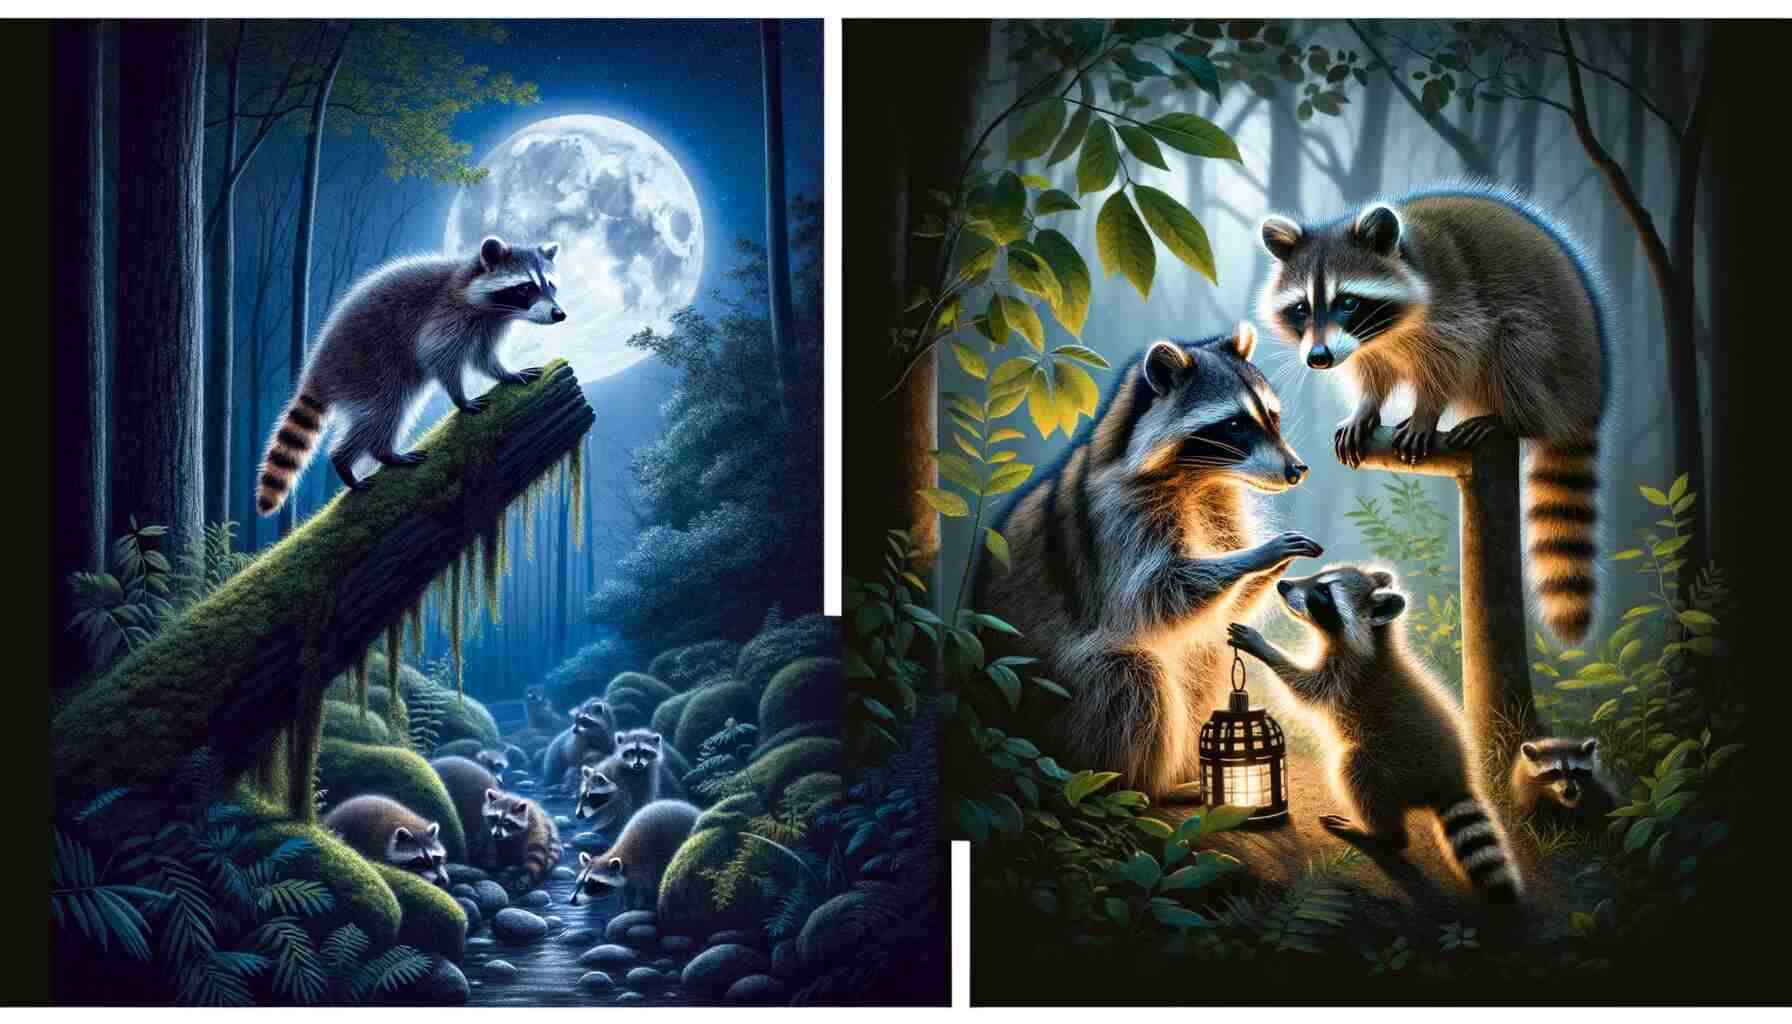 Here is a set of images depicting the behavior and social structure of raccoons. The first part of the image shows a raccoon engaging in nocturnal activities such as foraging or climbing in a moonlit setting. The second part portrays a mother raccoon with her kits, emphasizing the maternal bond and care within their natural habitat. These visuals vividly represent raccoons' natural behaviors and social dynamics.